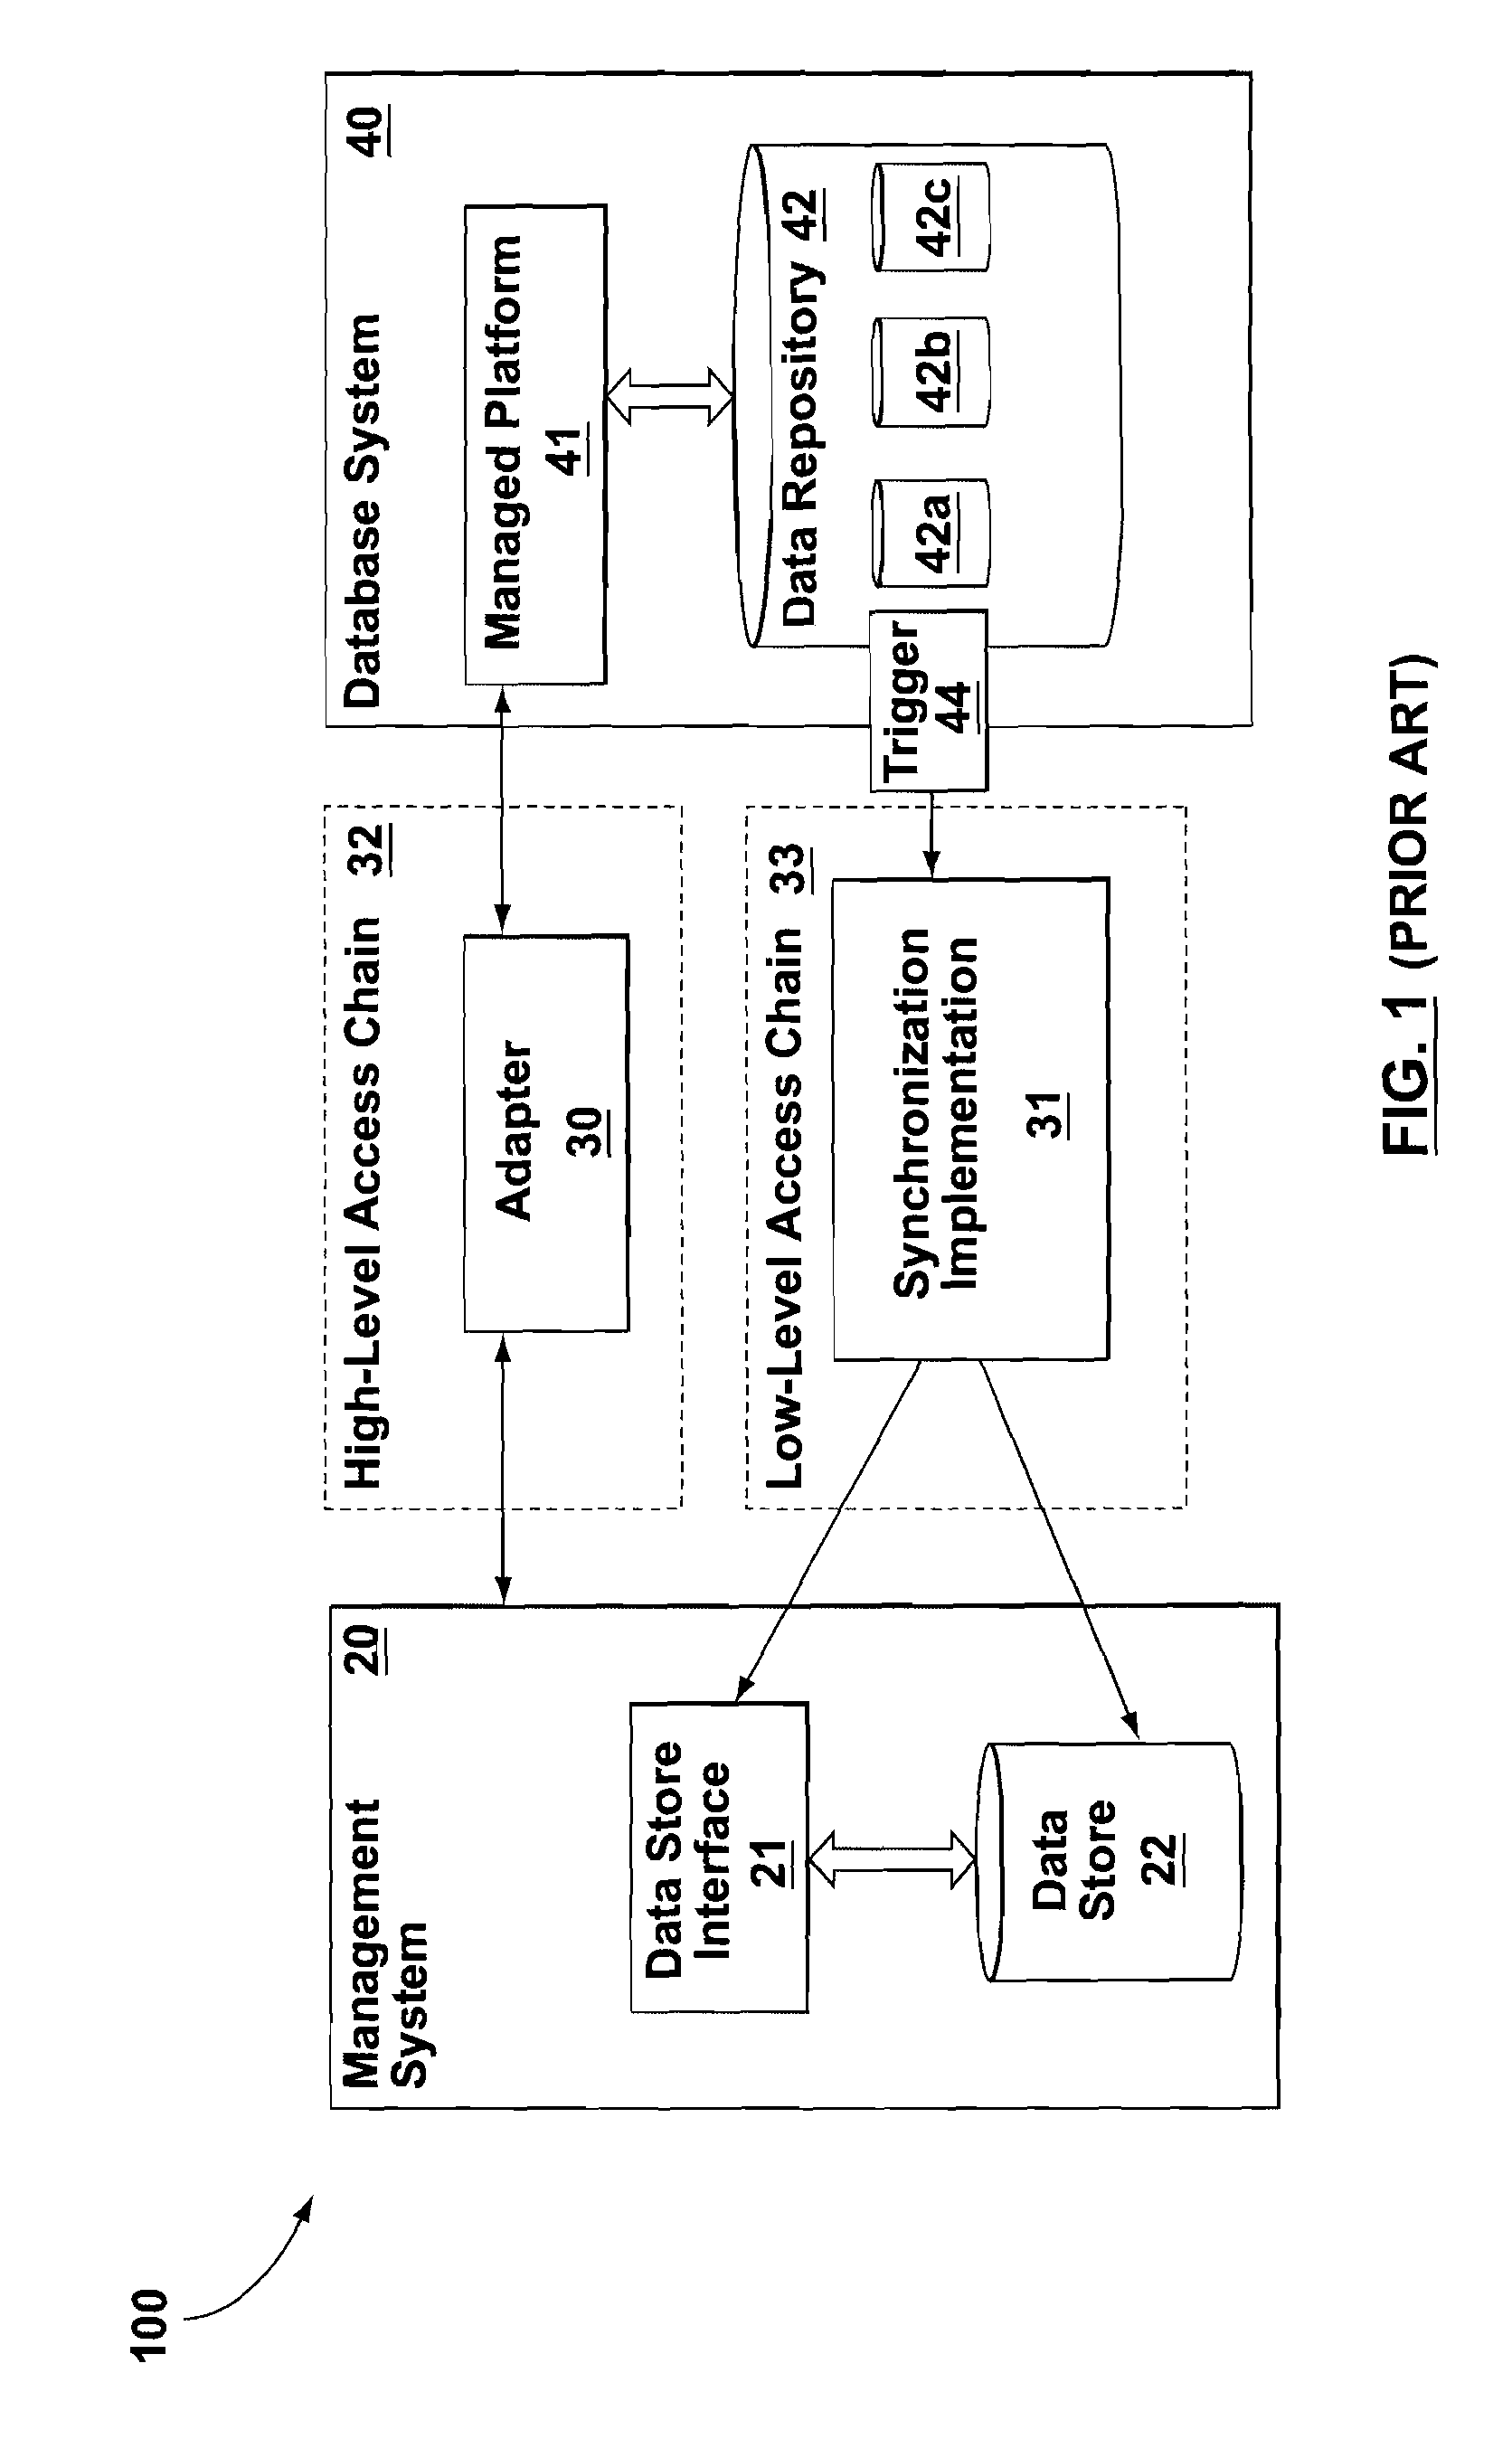 Systems, methods and software programs for data synchronization